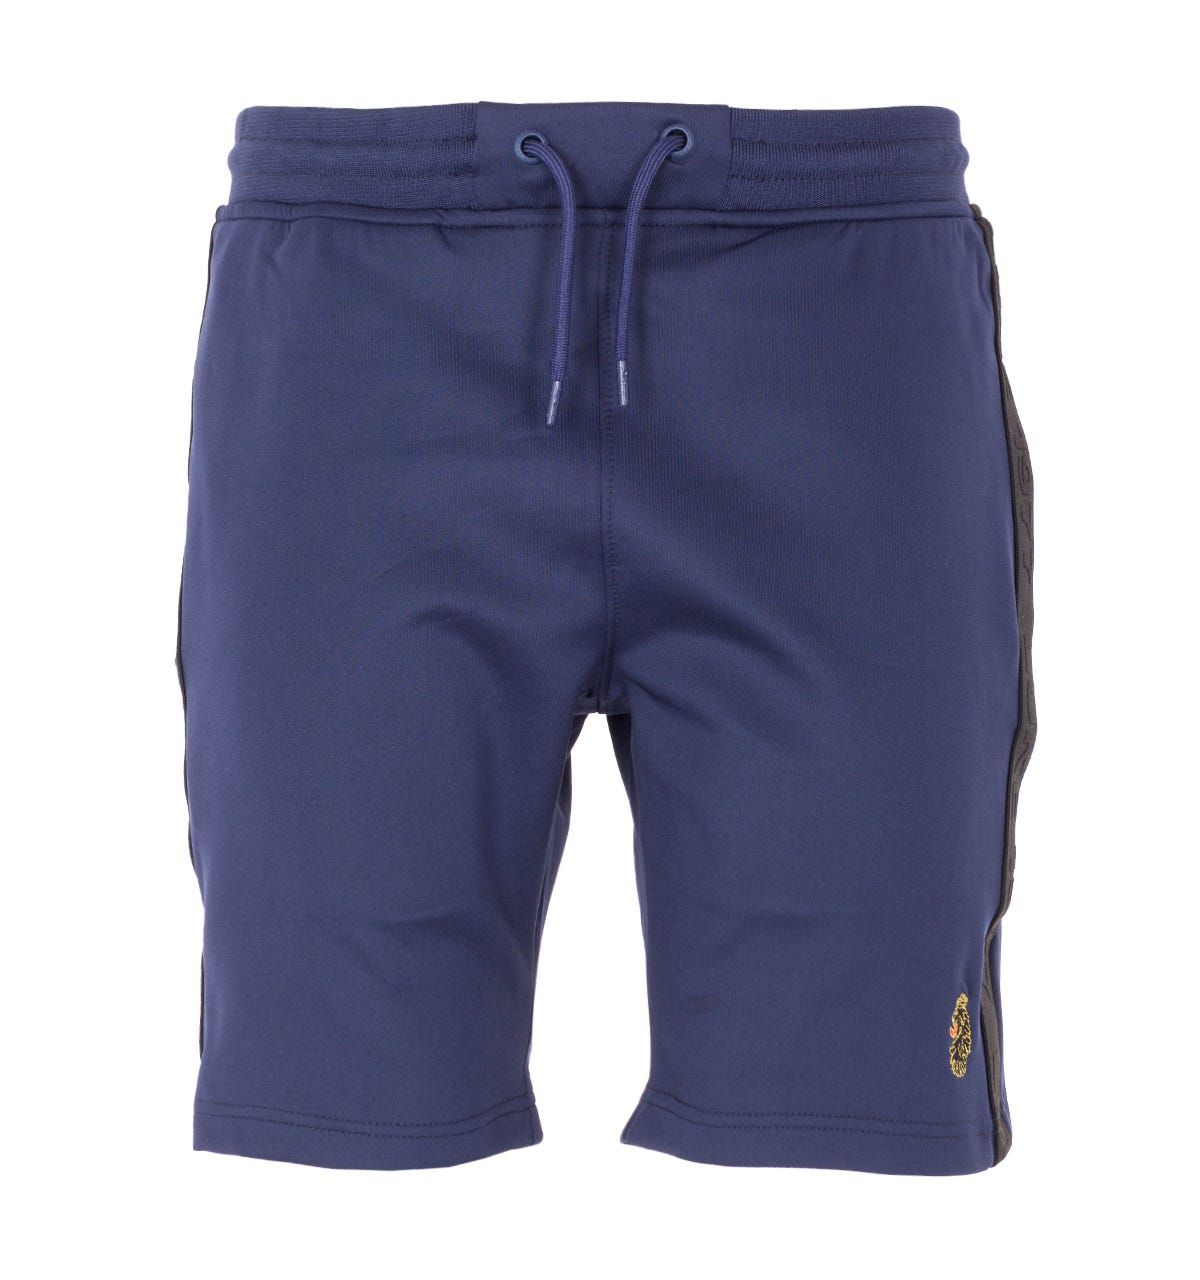 Luke 1977 is, without a doubt, the go-to brand if you're after a well crafted, witty and masculine item. Finished with the signature Luke Lion logo, you're looking at one of the UK's top contemporary menswear brands. The Tape Logo Sweat Shorts combine comfort and style, ensuring you look great in and out of the house. Crafted from a stretch poly smooth fabric, featuring Luke 1977 raised text tape detailing down both legs. Regular Fit. Stretch Polyester. Drawstring Waist. Twin Side Seam Pockets. Rear Zip Pocket. Logo Tape Detailing. Luke 1977 Branding. Style & Fit: Regular Fit. Fits True to Size. Composition & Care: 90% Polyester 10% Elastane. Machine Wash